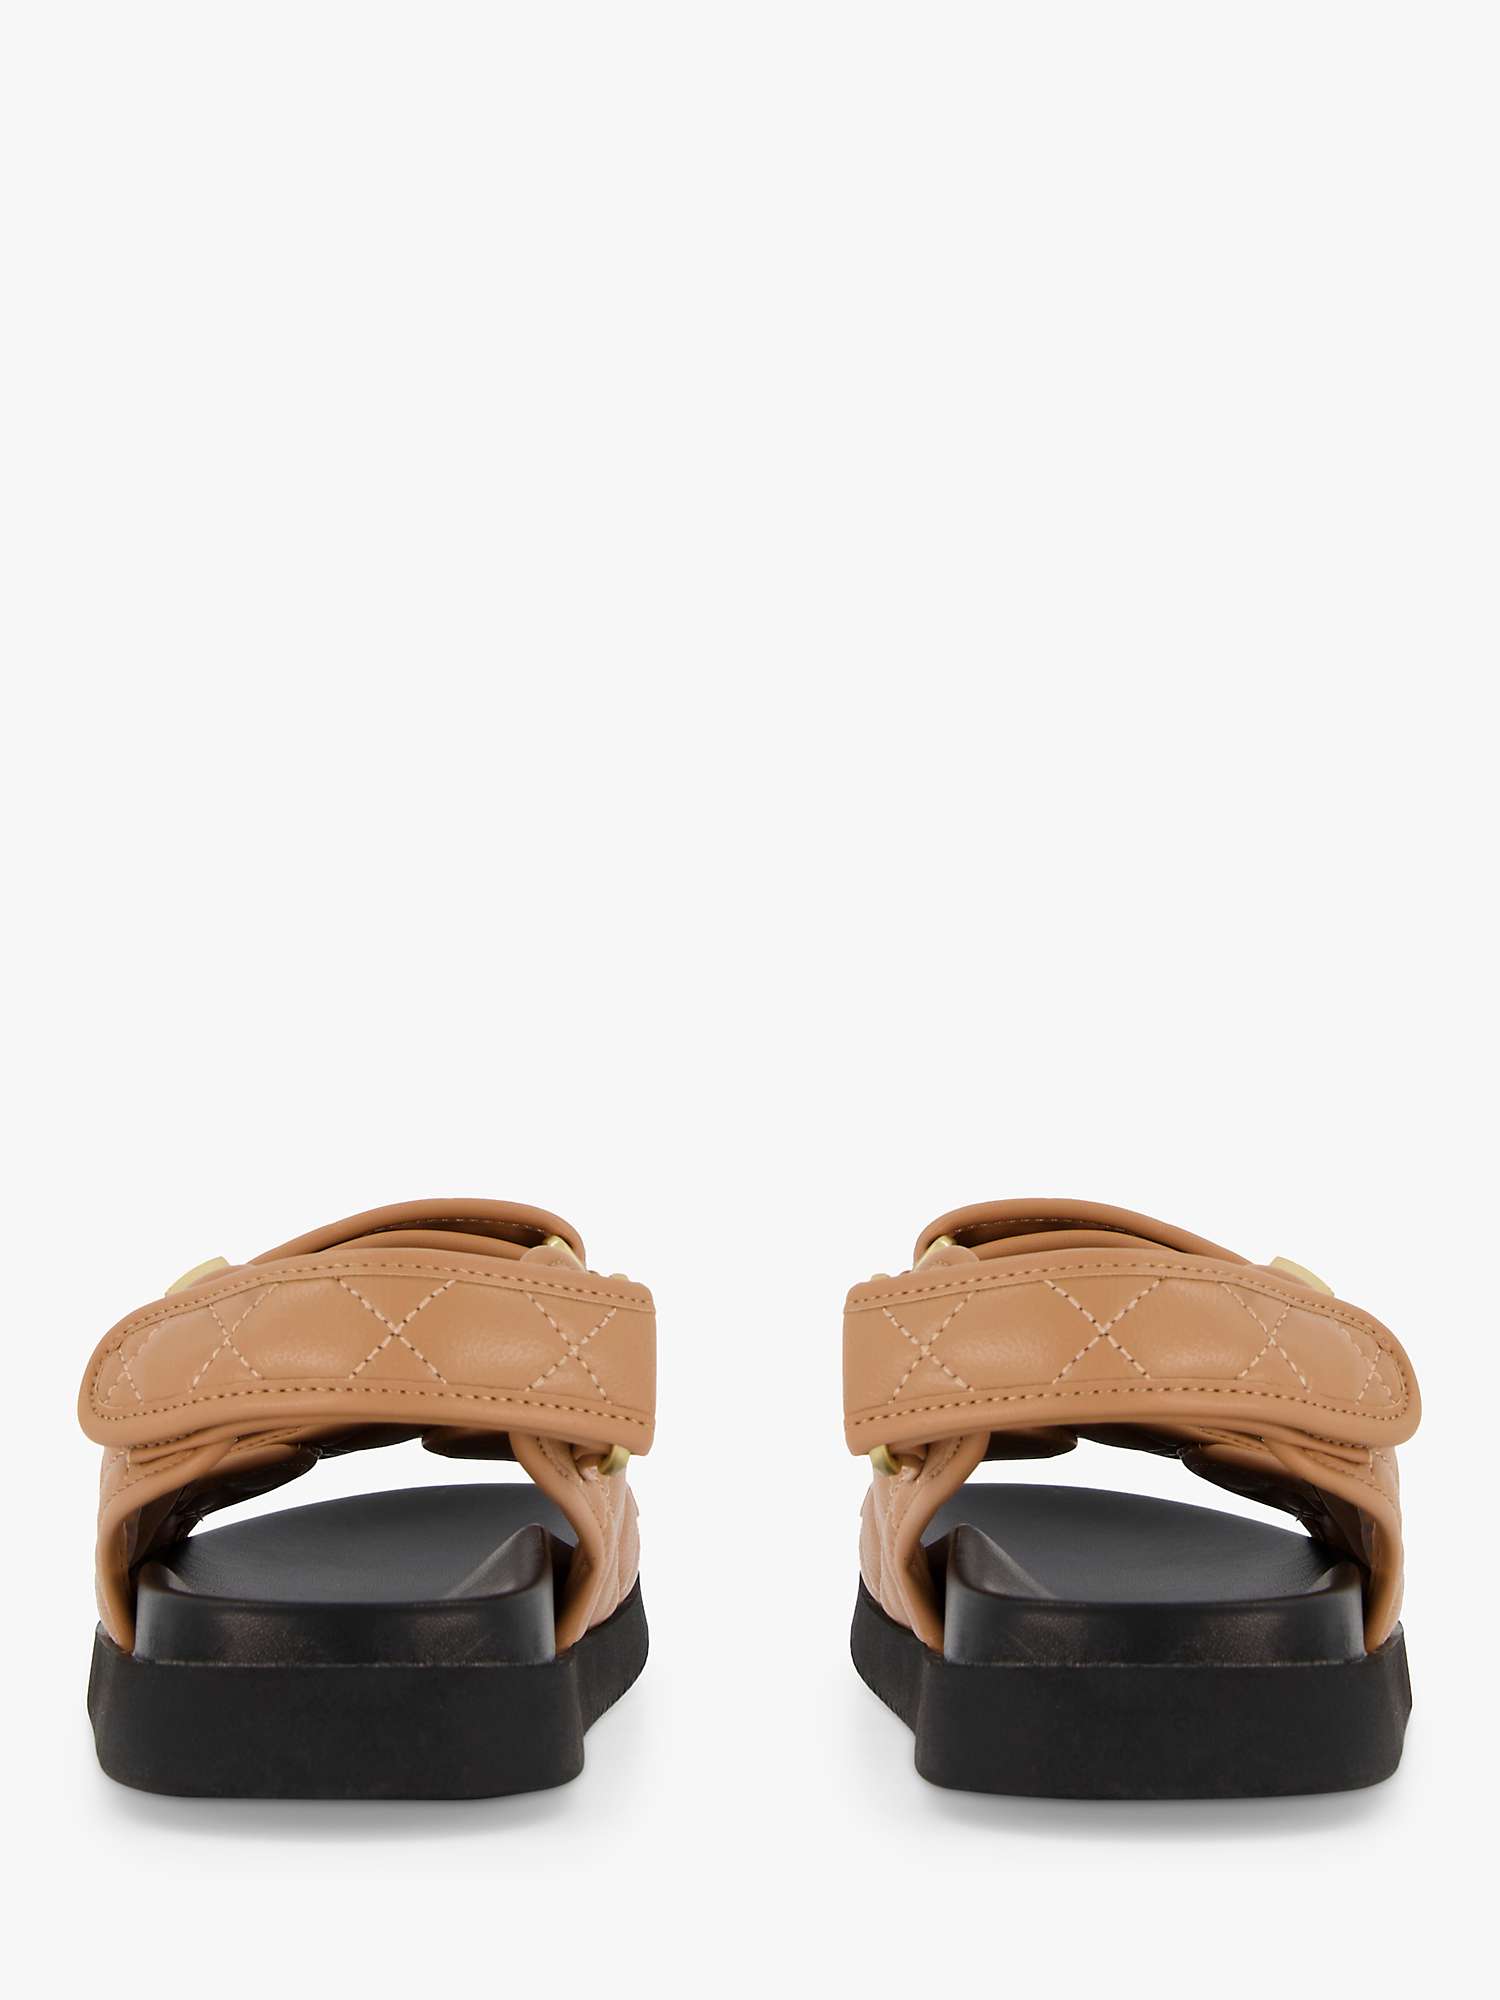 Buy Dune Lockstock Leather Double Strap Sandals Online at johnlewis.com